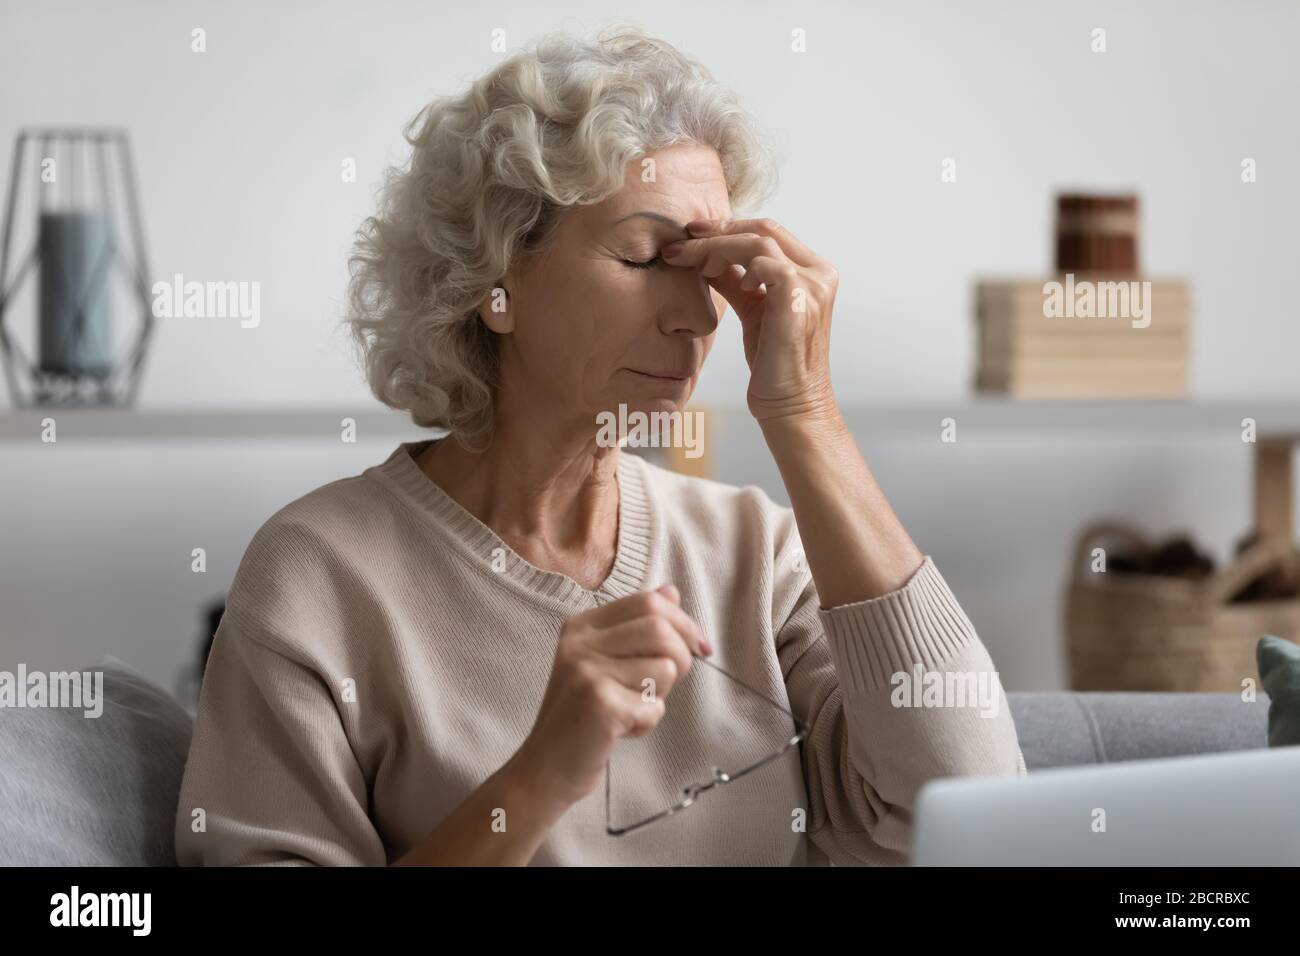 Middle aged grandmother rubbing eye, feeling tired. Stock Photo